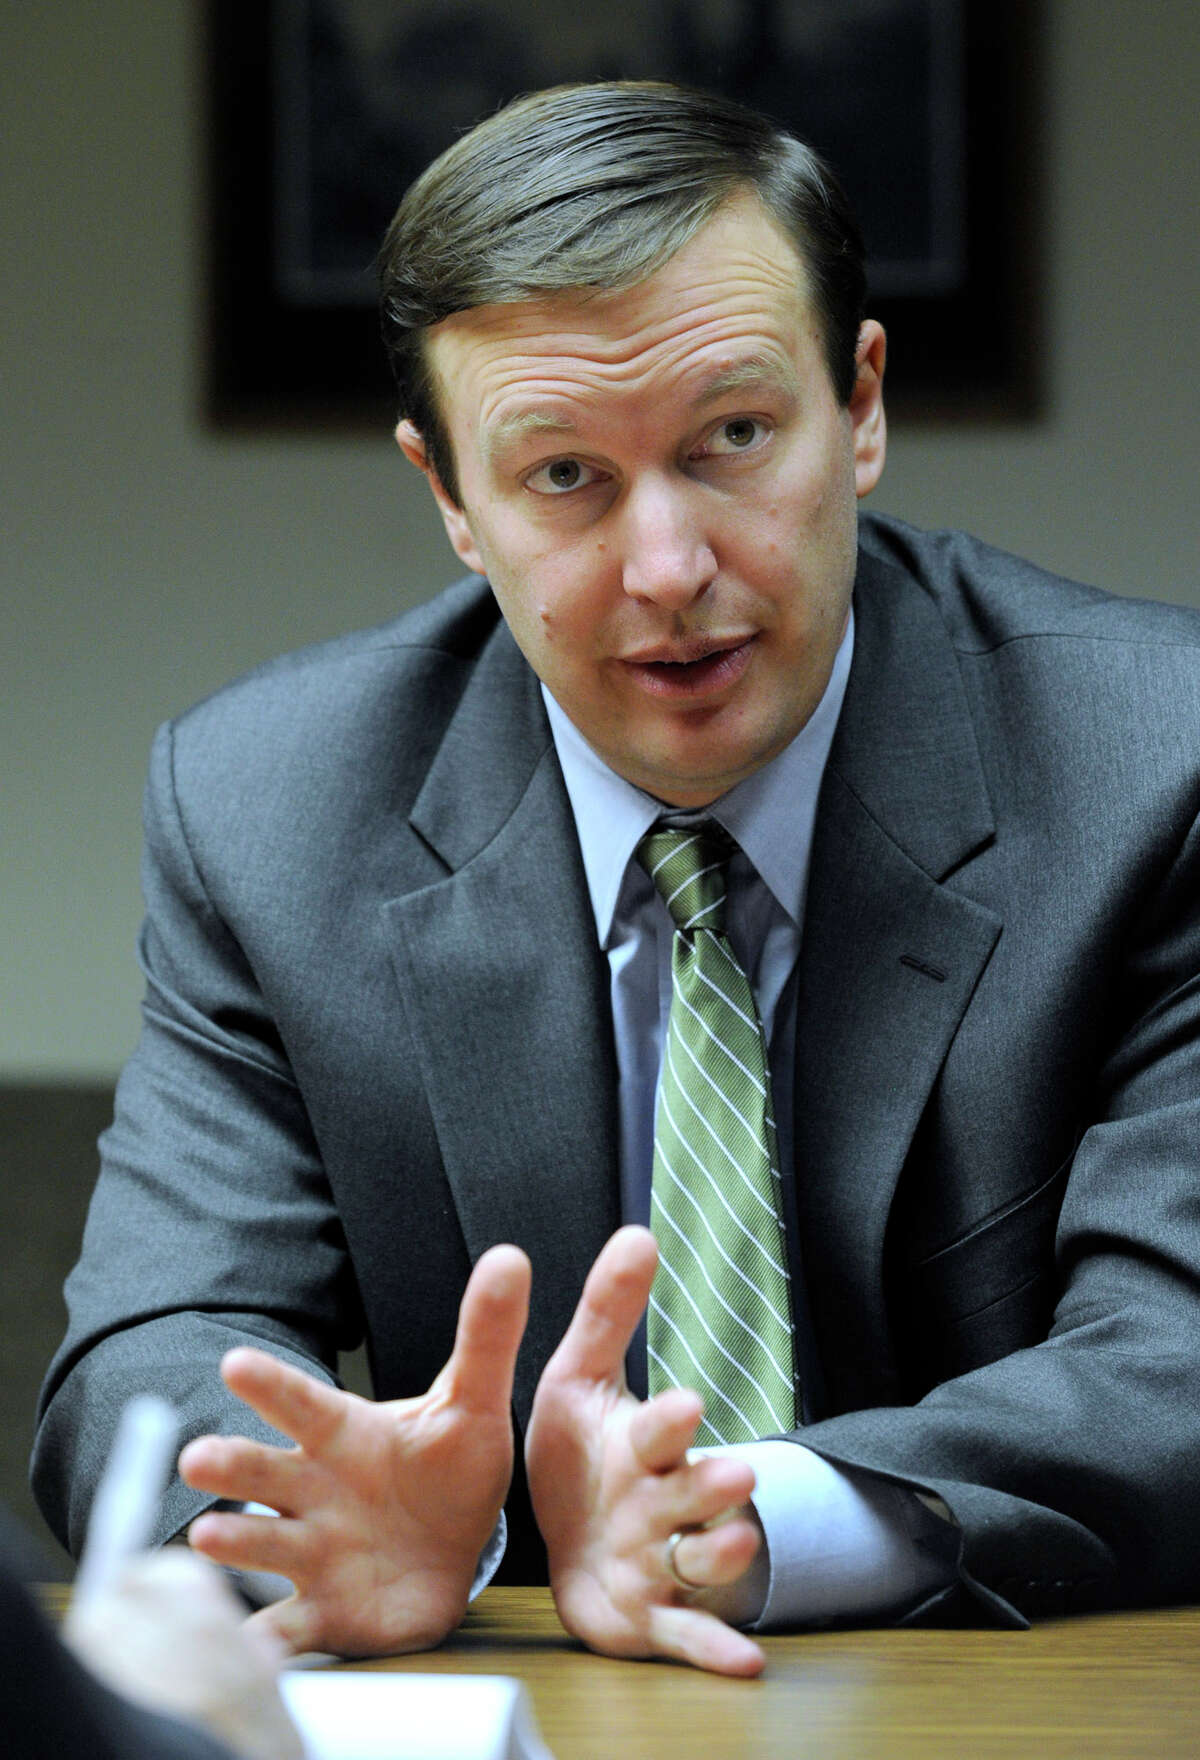 Congressman Chris Murphy meets with The News-Times editorial board Turesday, April 10, 2012.